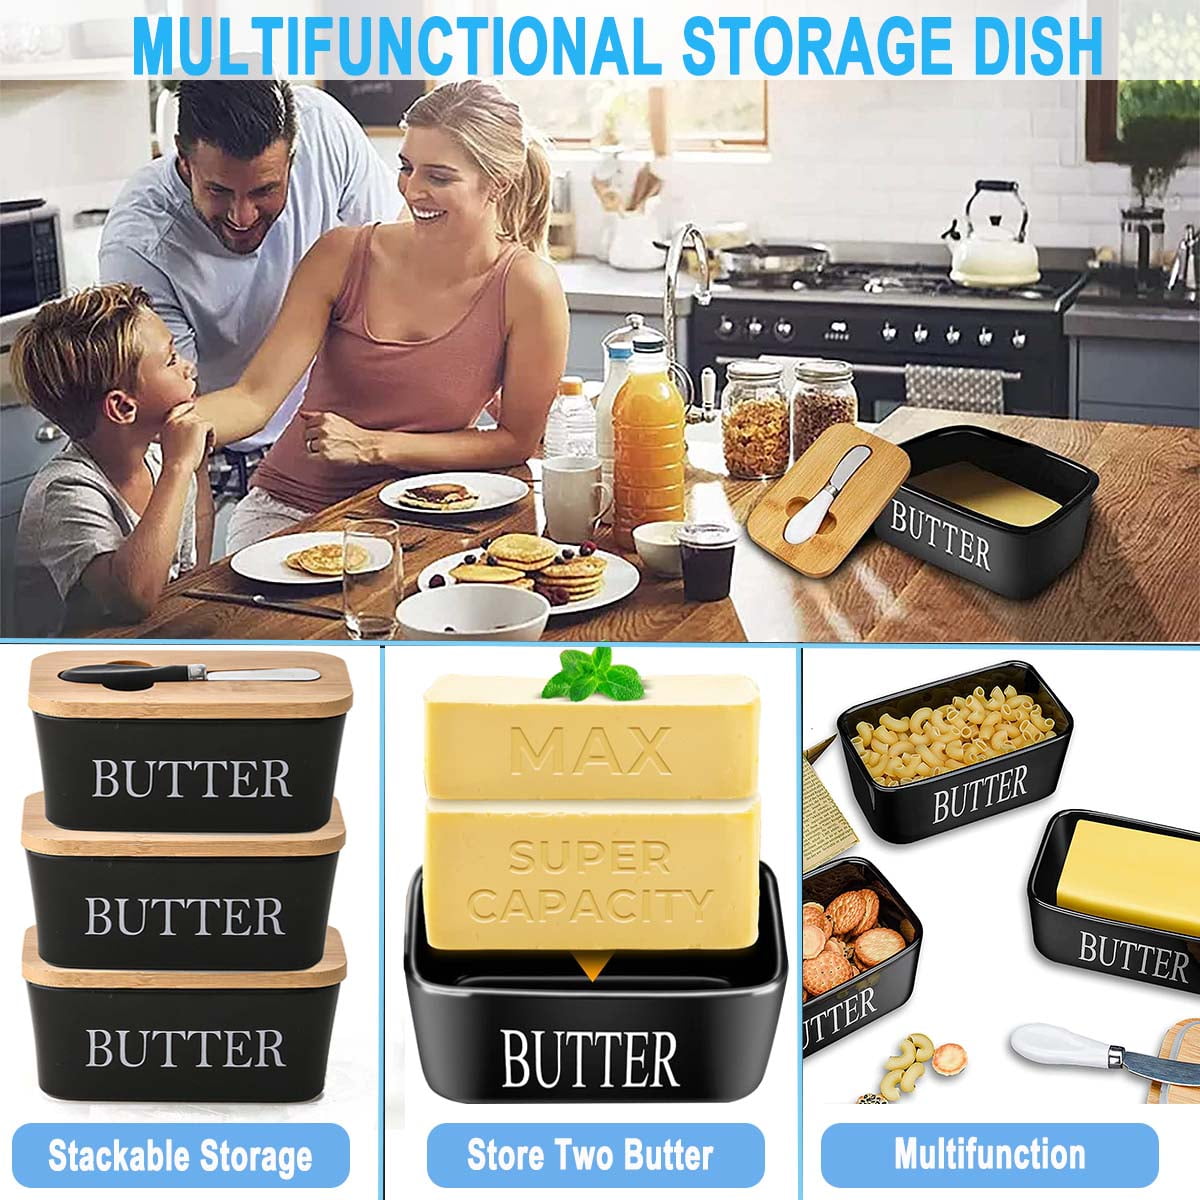 Butter Stick Holder, Butter Spreader Dispenser with Cover, Standard Butter Dish Keeper Container for Corn Pancakes Waffles Bagels Toast, Dishwasher